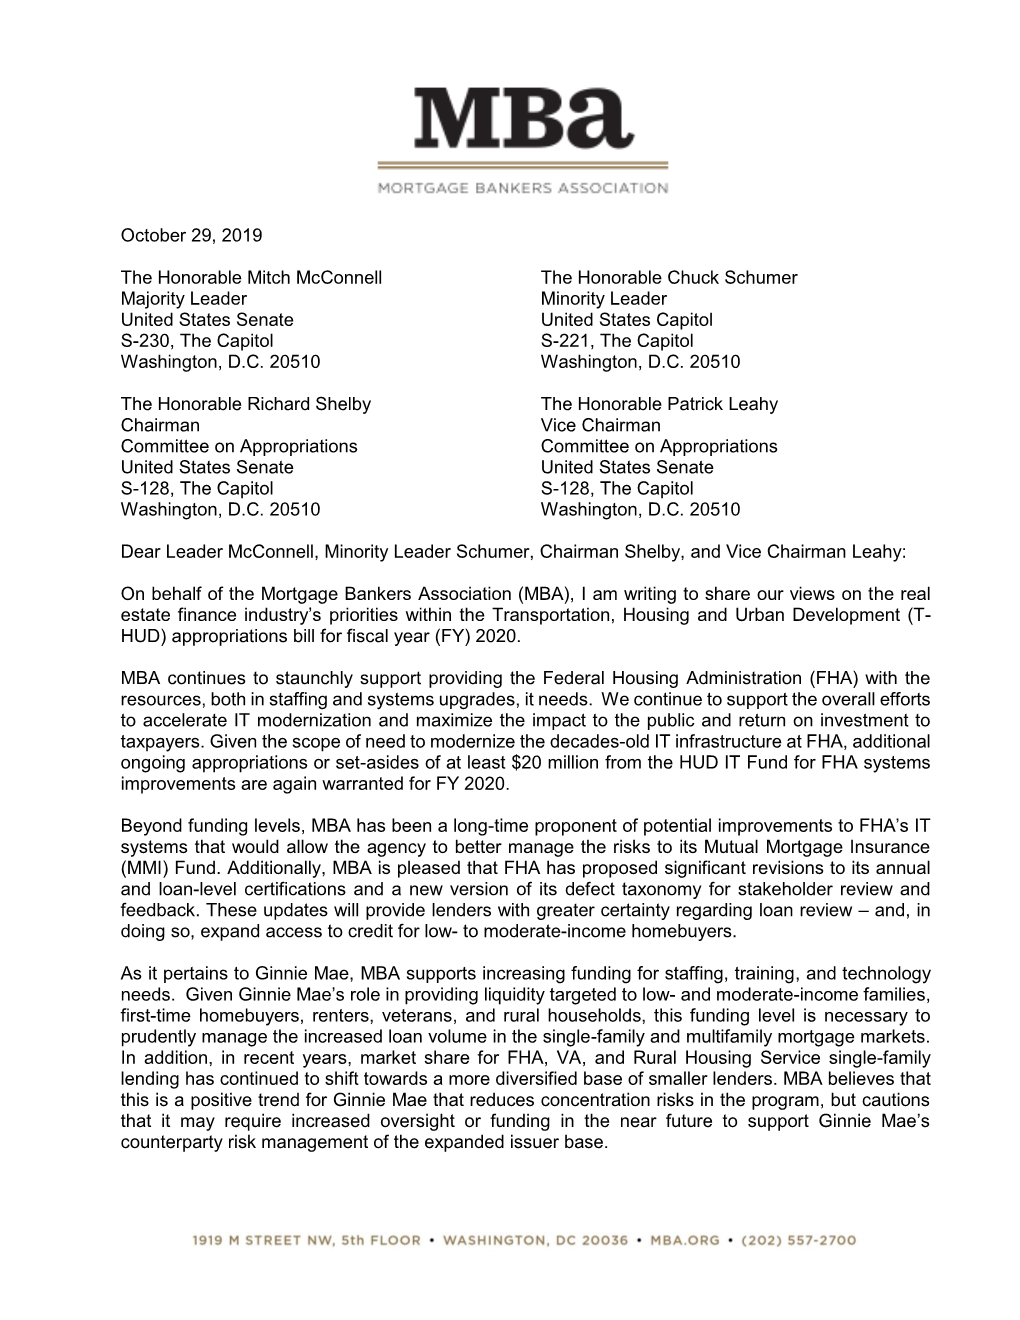 MBA Letter to the Senate on T-HUD